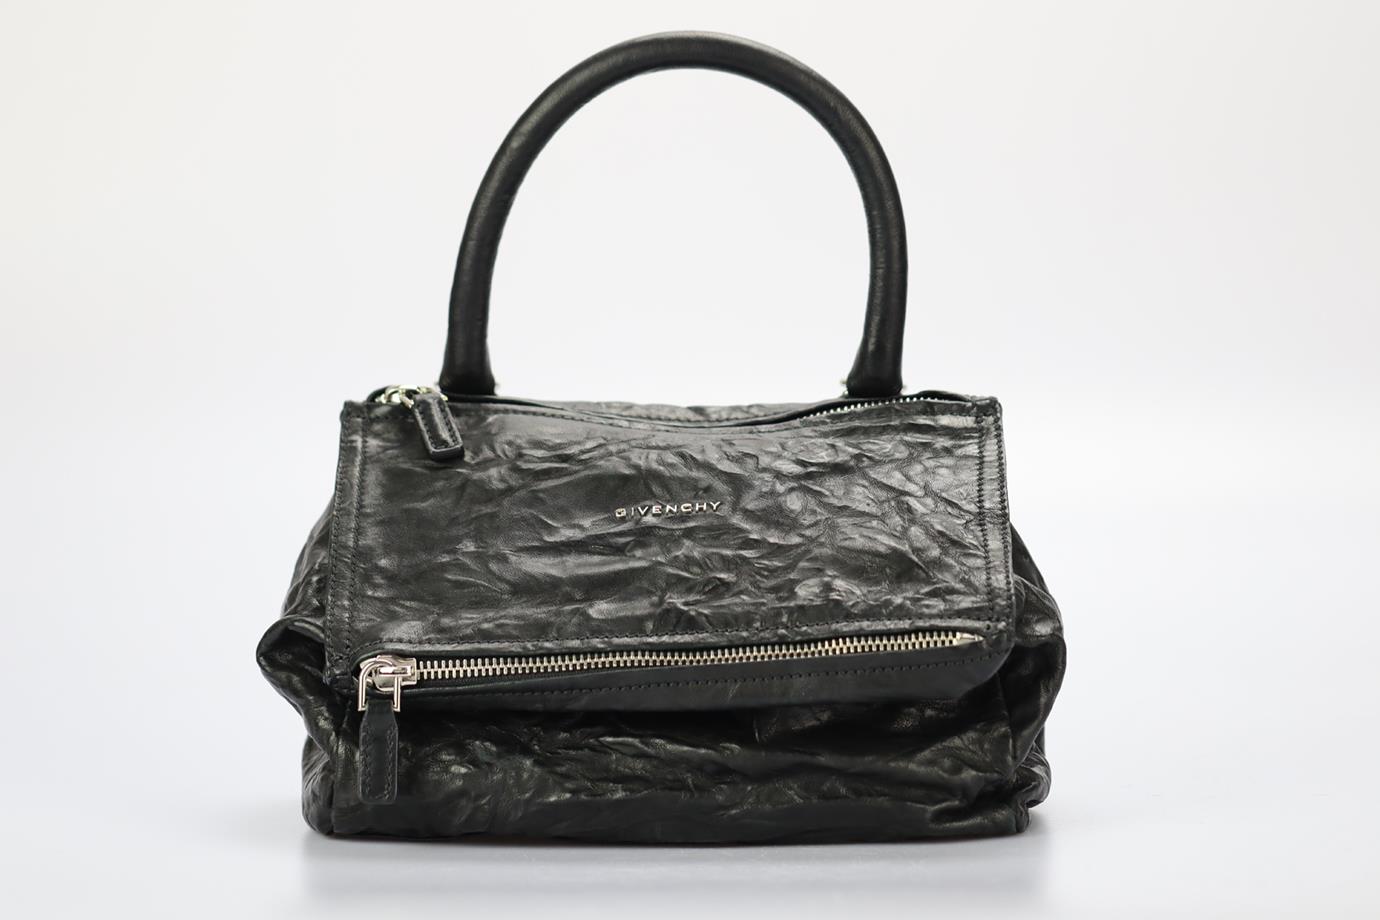 GIVENCHY PANDORA SMALL TEXTURED LEATHER SHOULDER BAG